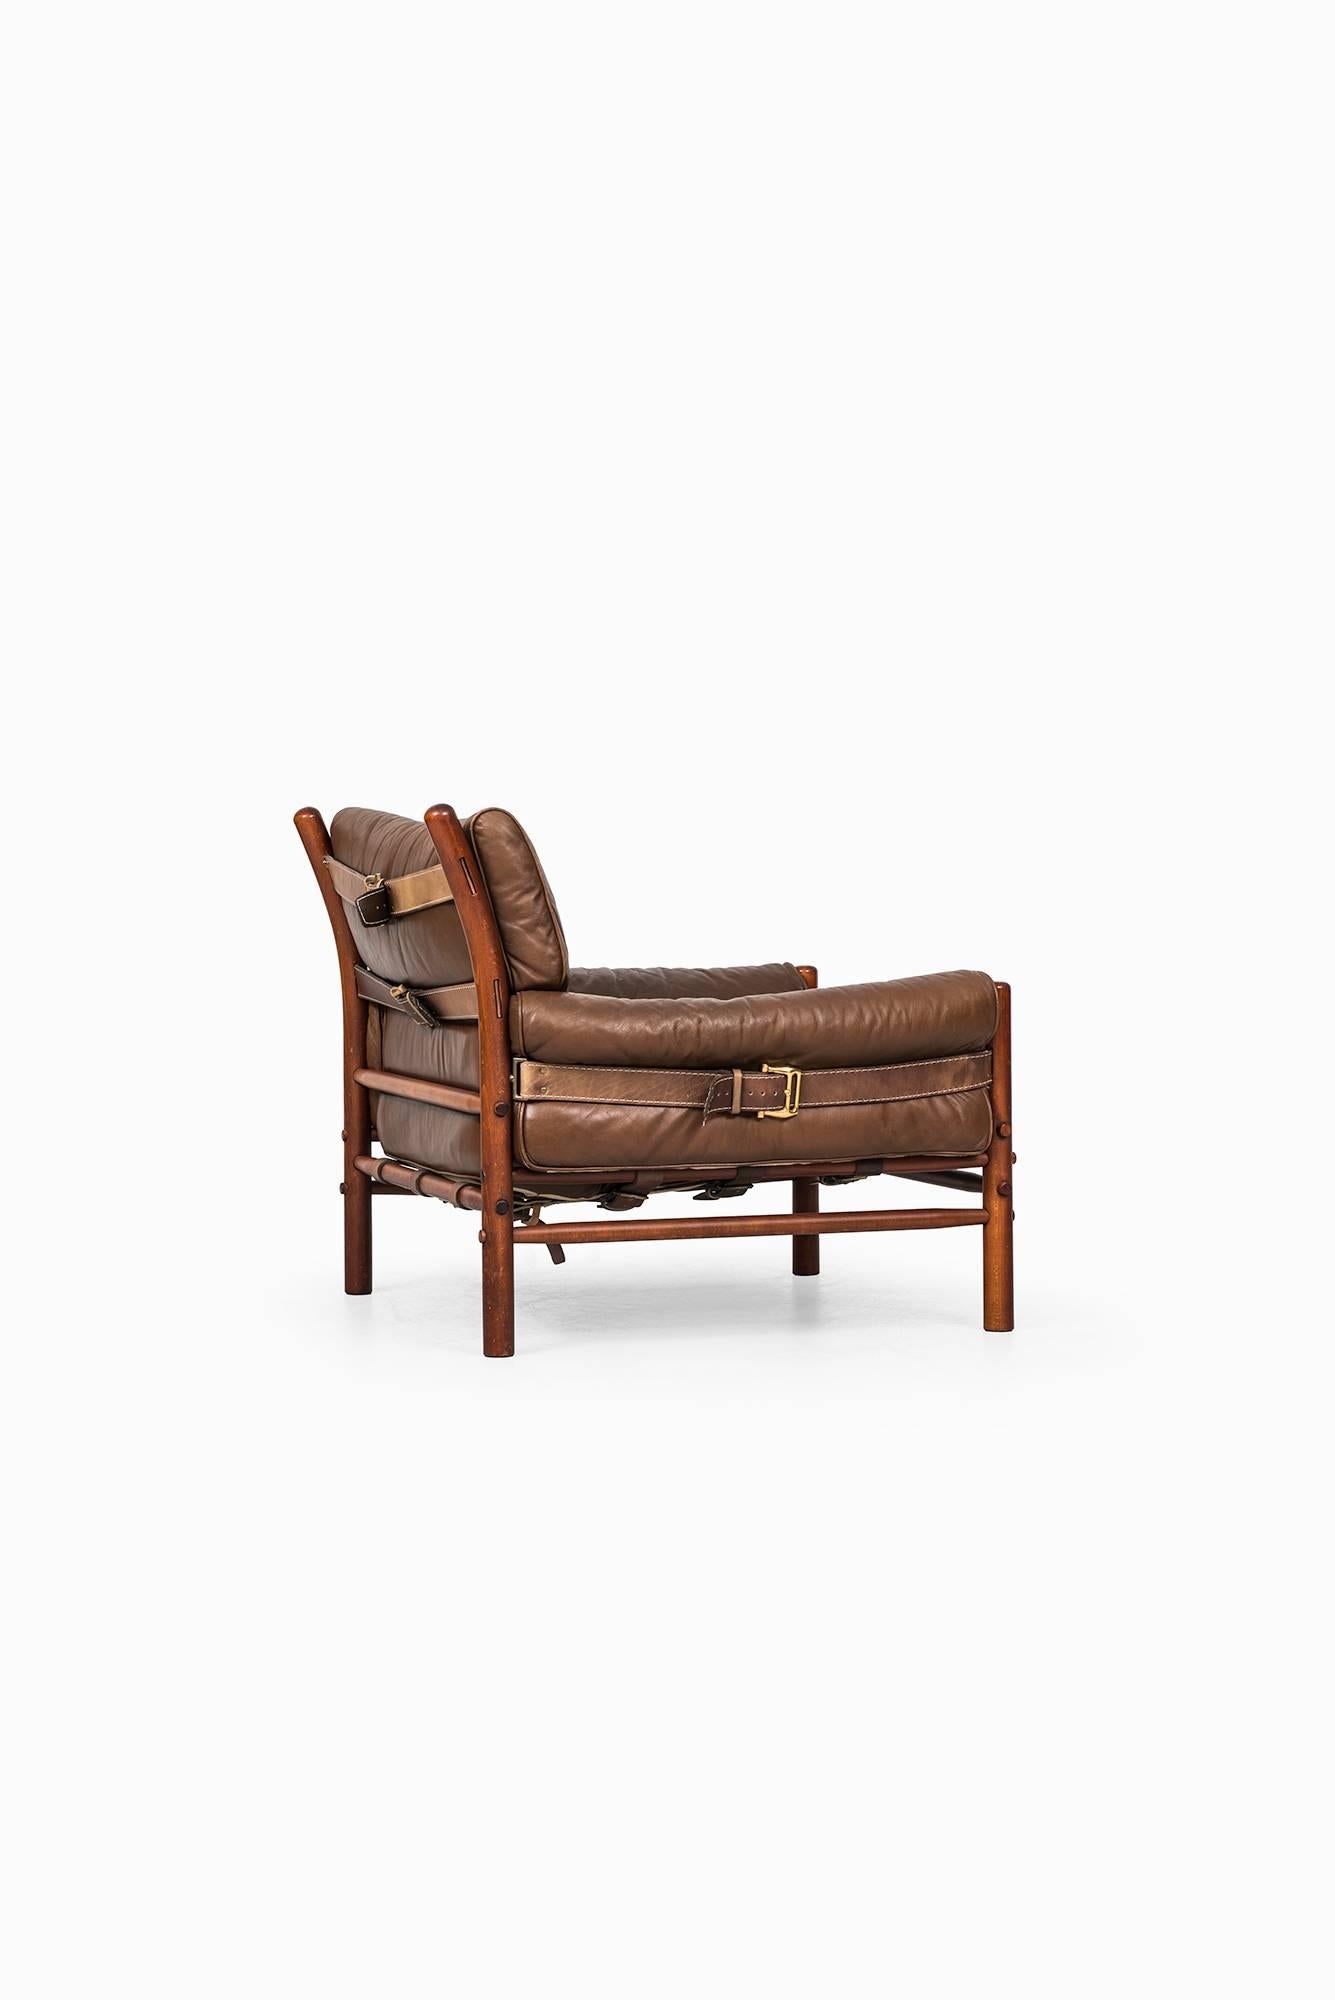 Mid-20th Century Arne Norell Easy Chair Model Kontiki by Arne Norell Ab in Sweden